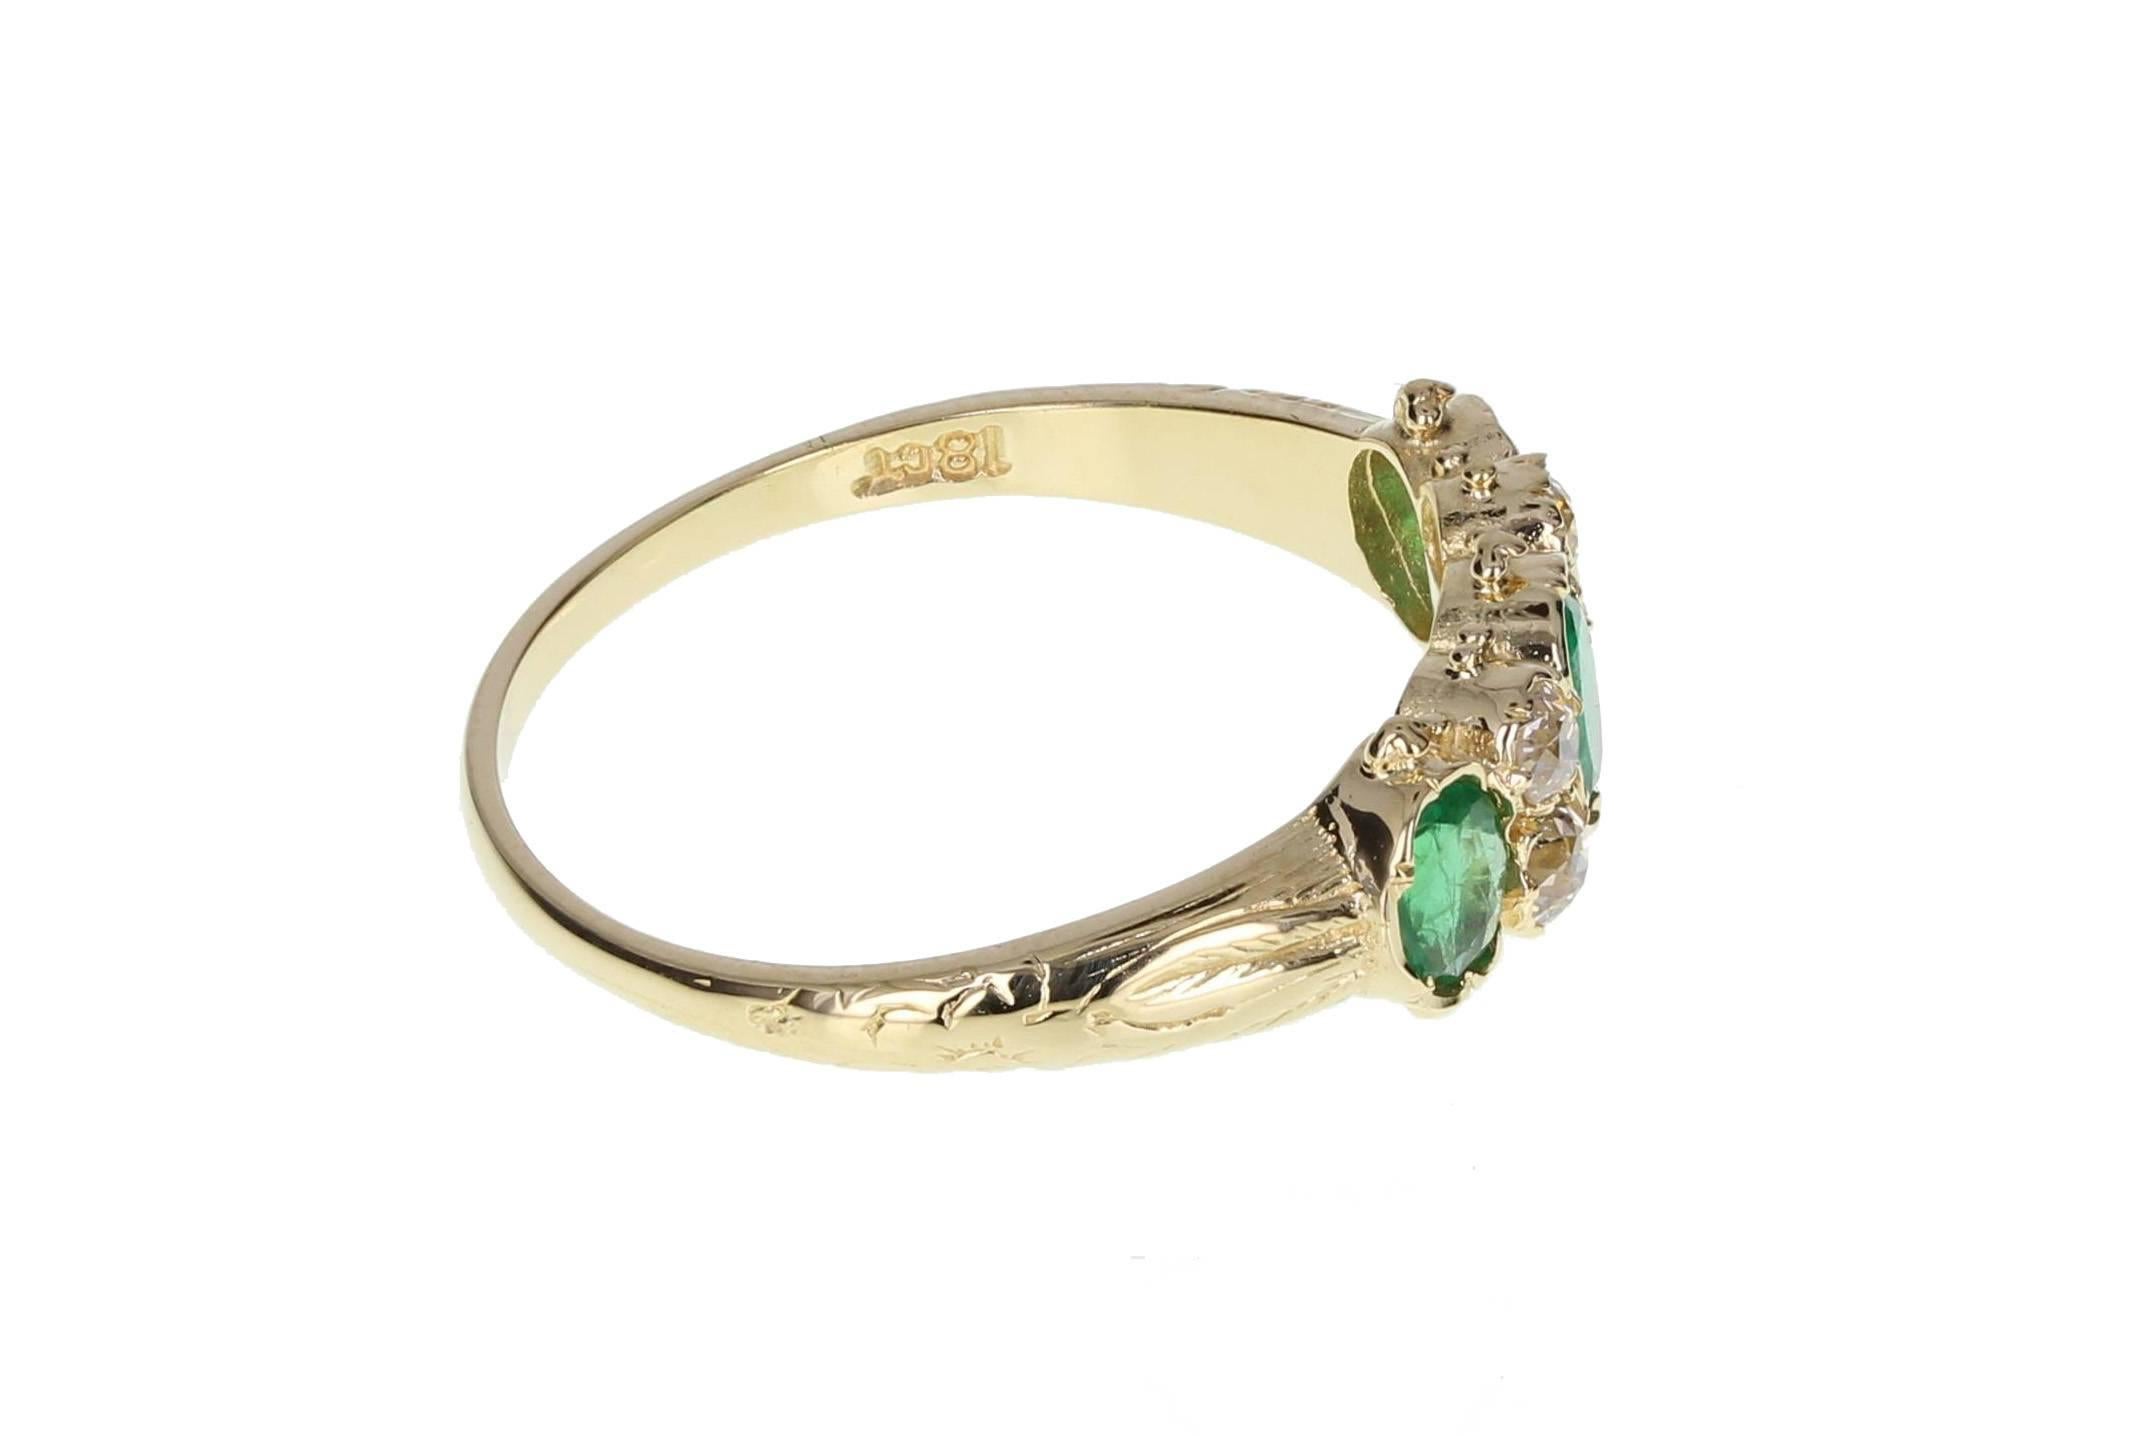 This very fine antique ring in 18ct gold features three exceptional quality emeralds of deep, well saturated green colour and good clarity, accented by particularly bright and lively old-cut diamonds. Carved scroll-work to the shoulders and a